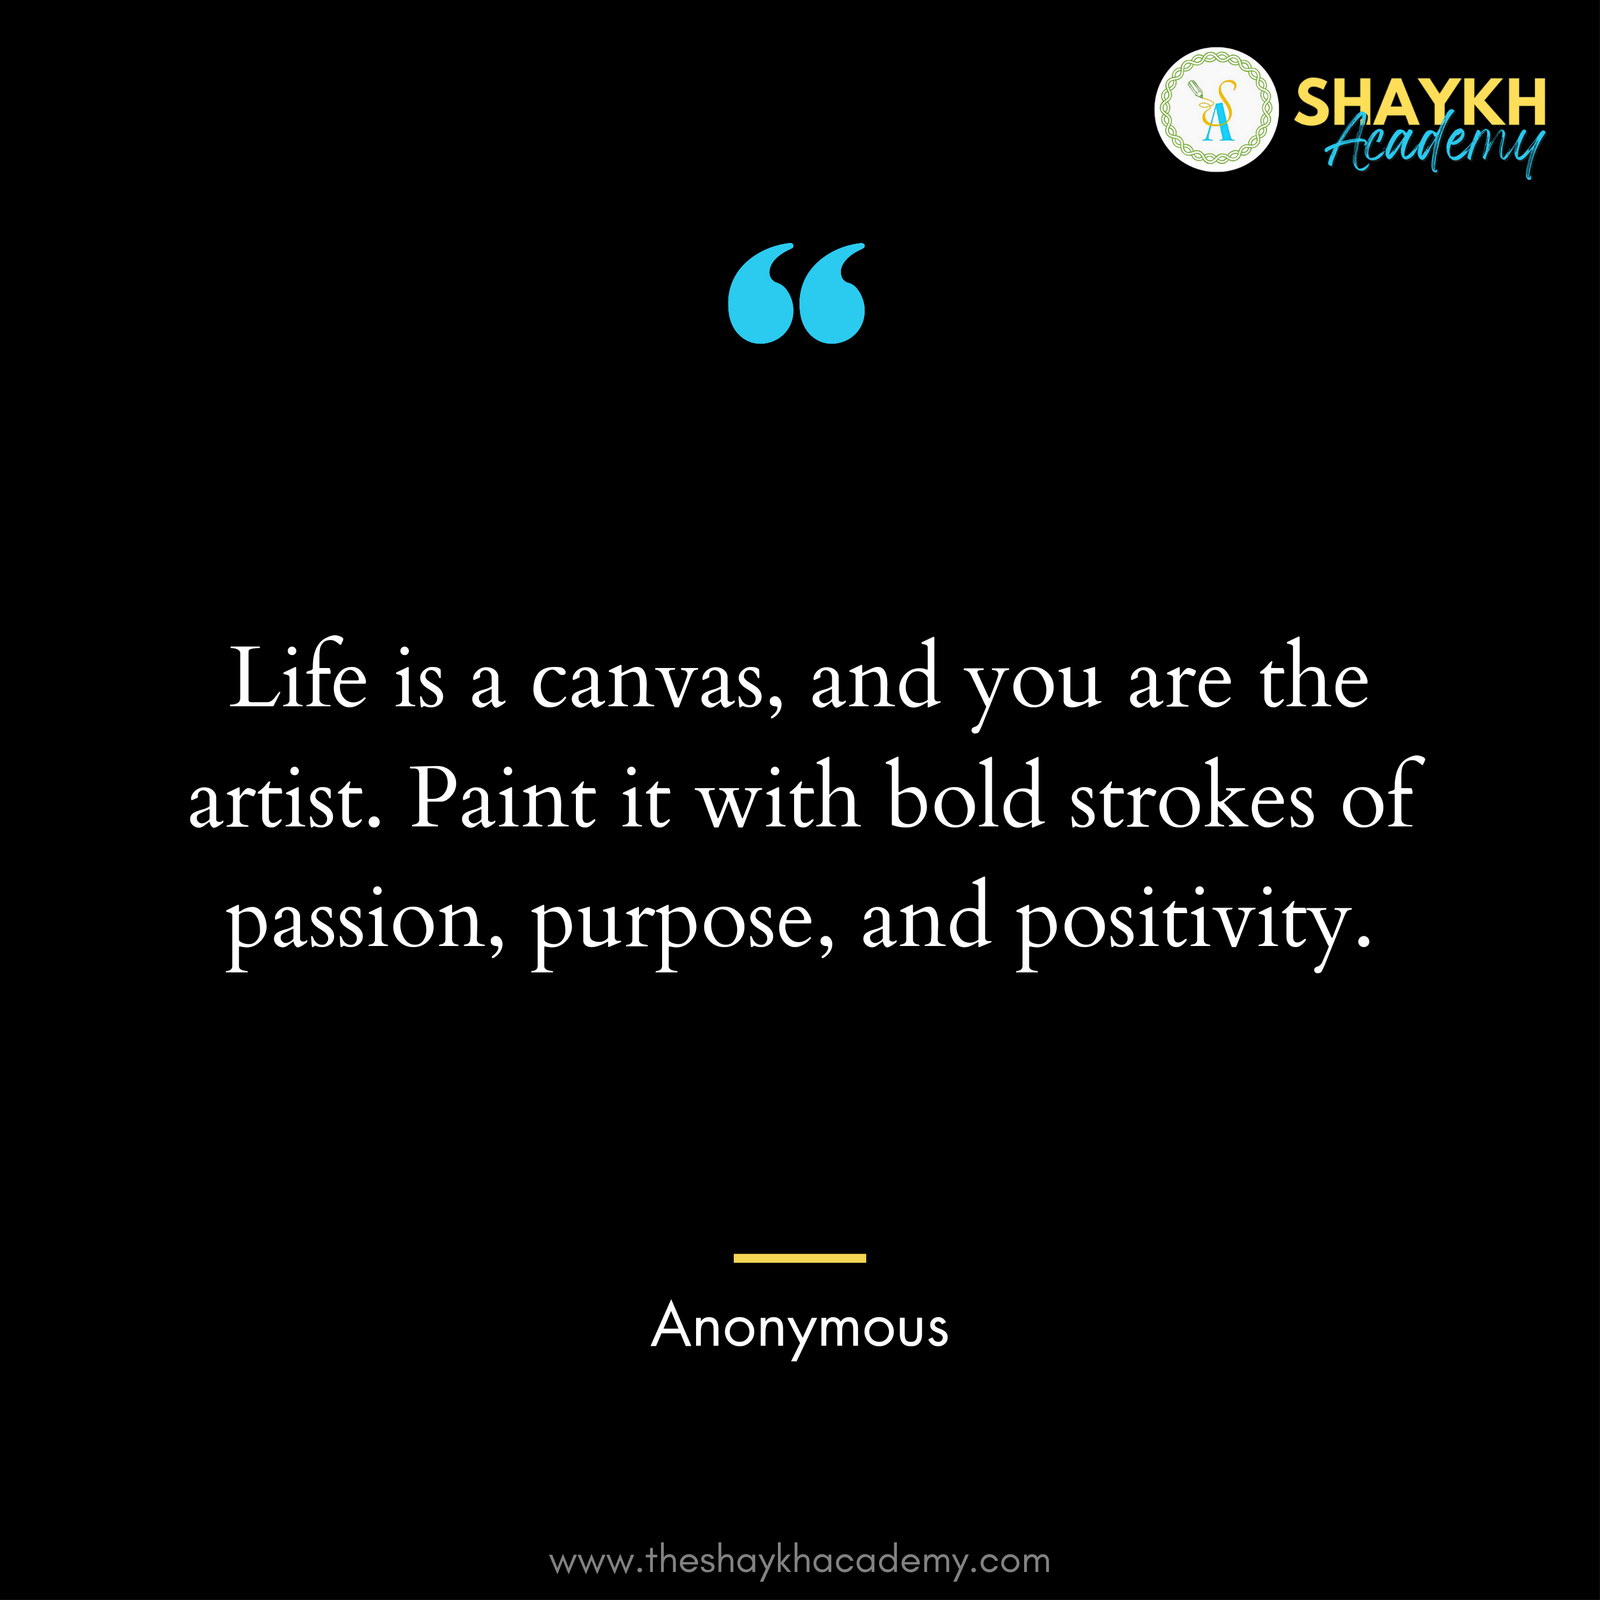 Life is a canvas, and you are the artist. Paint it with bold strokes of passion, purpose, and positivity.